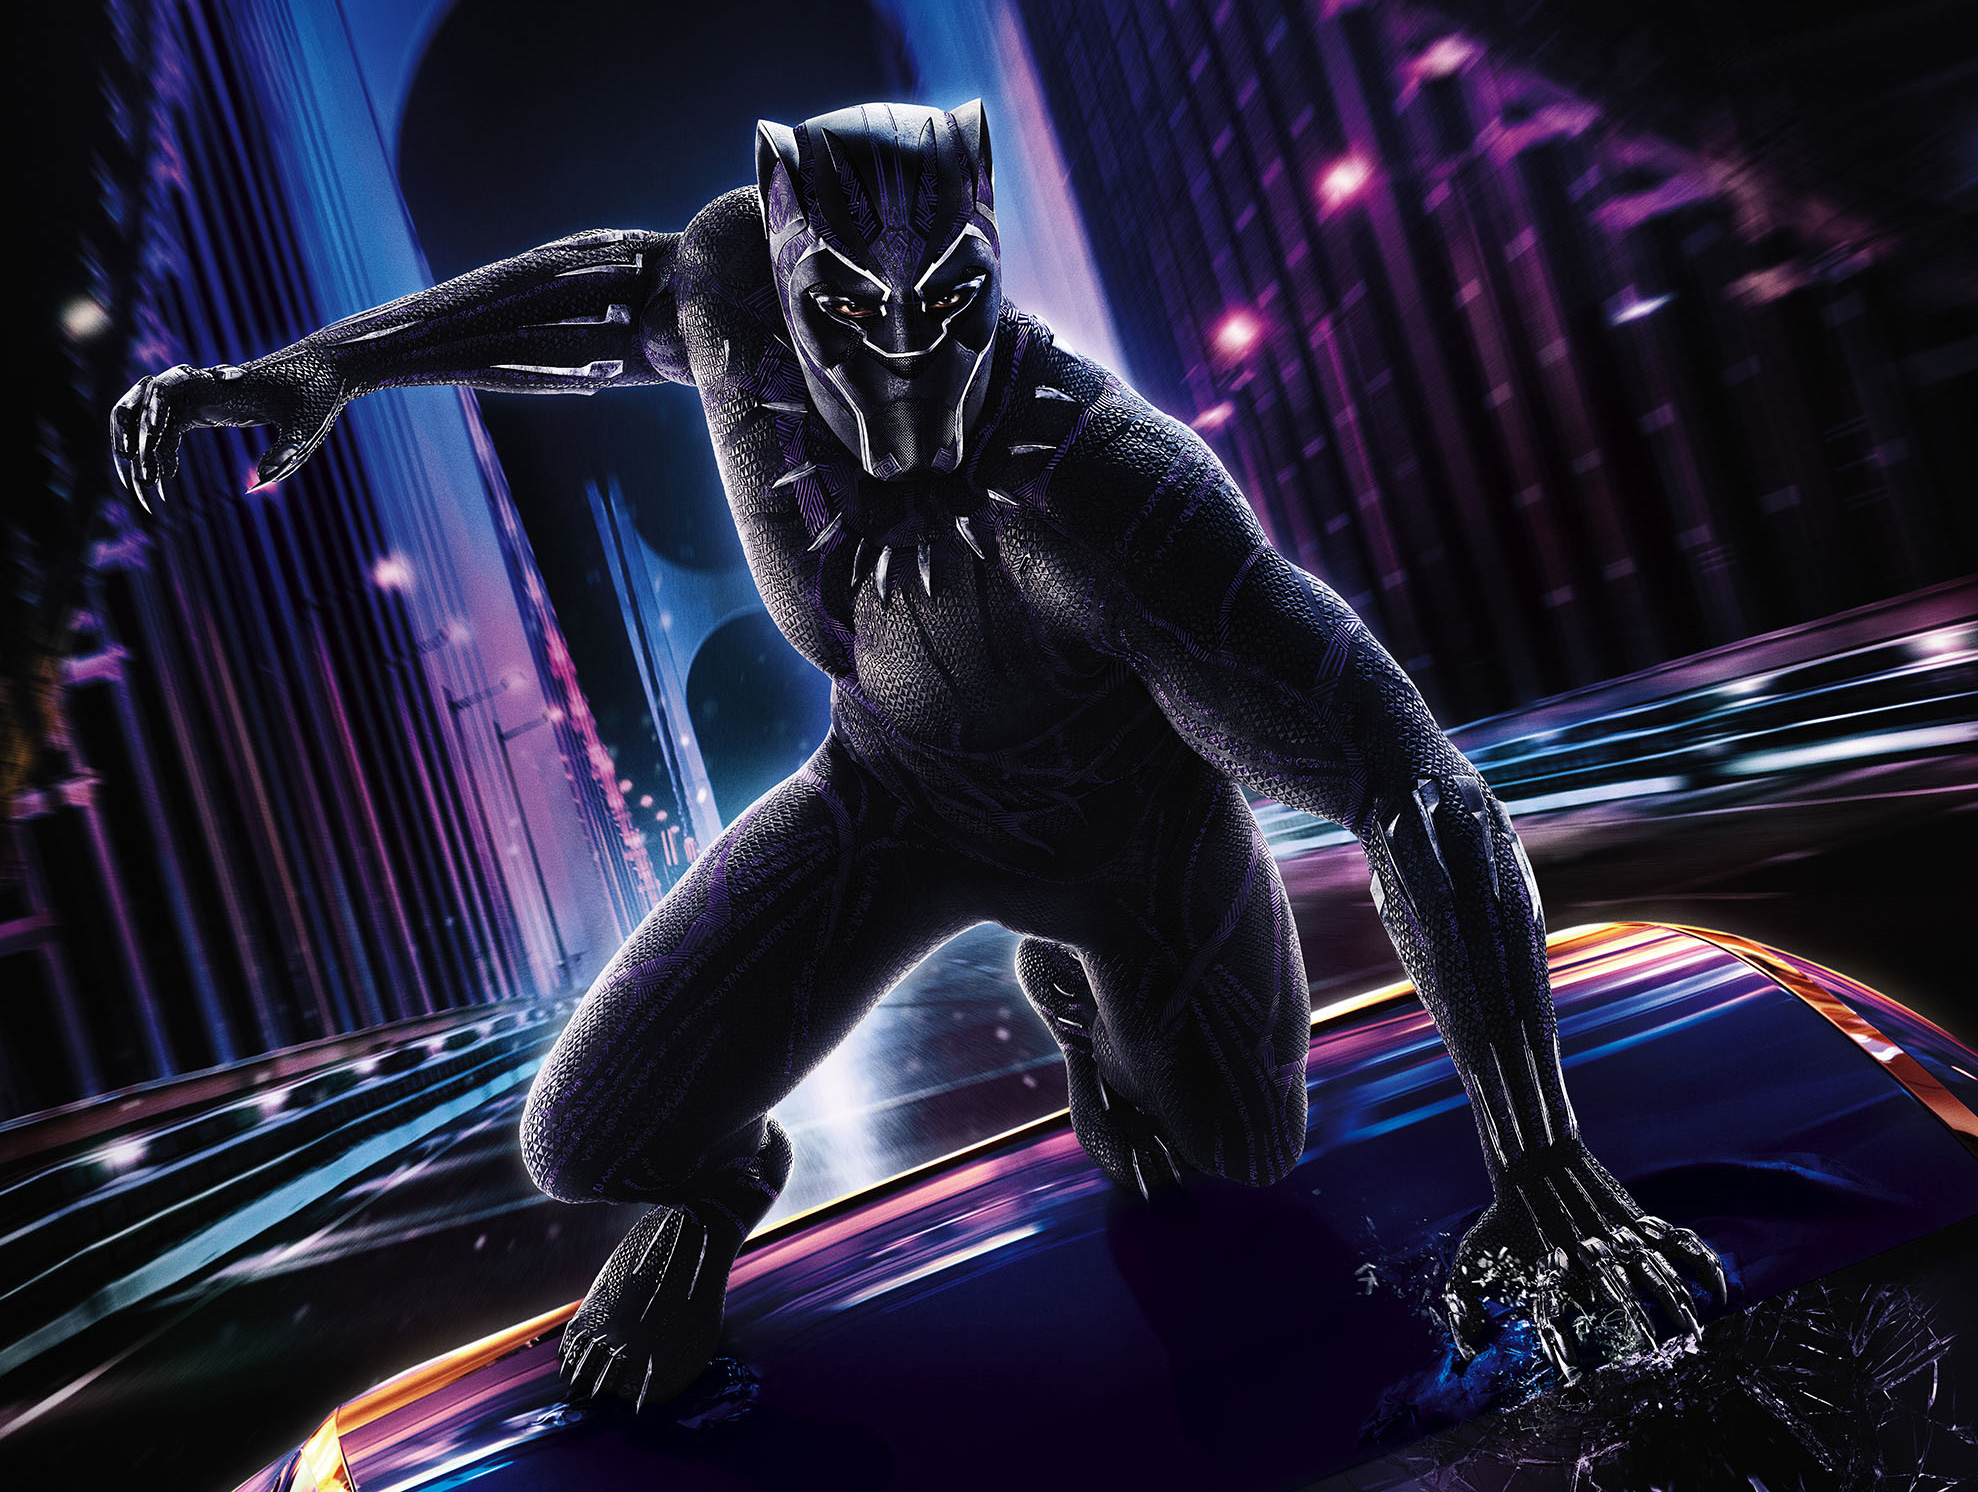 black-panther-2018-movie-poster-hd-movies-4k-wallpapers-images